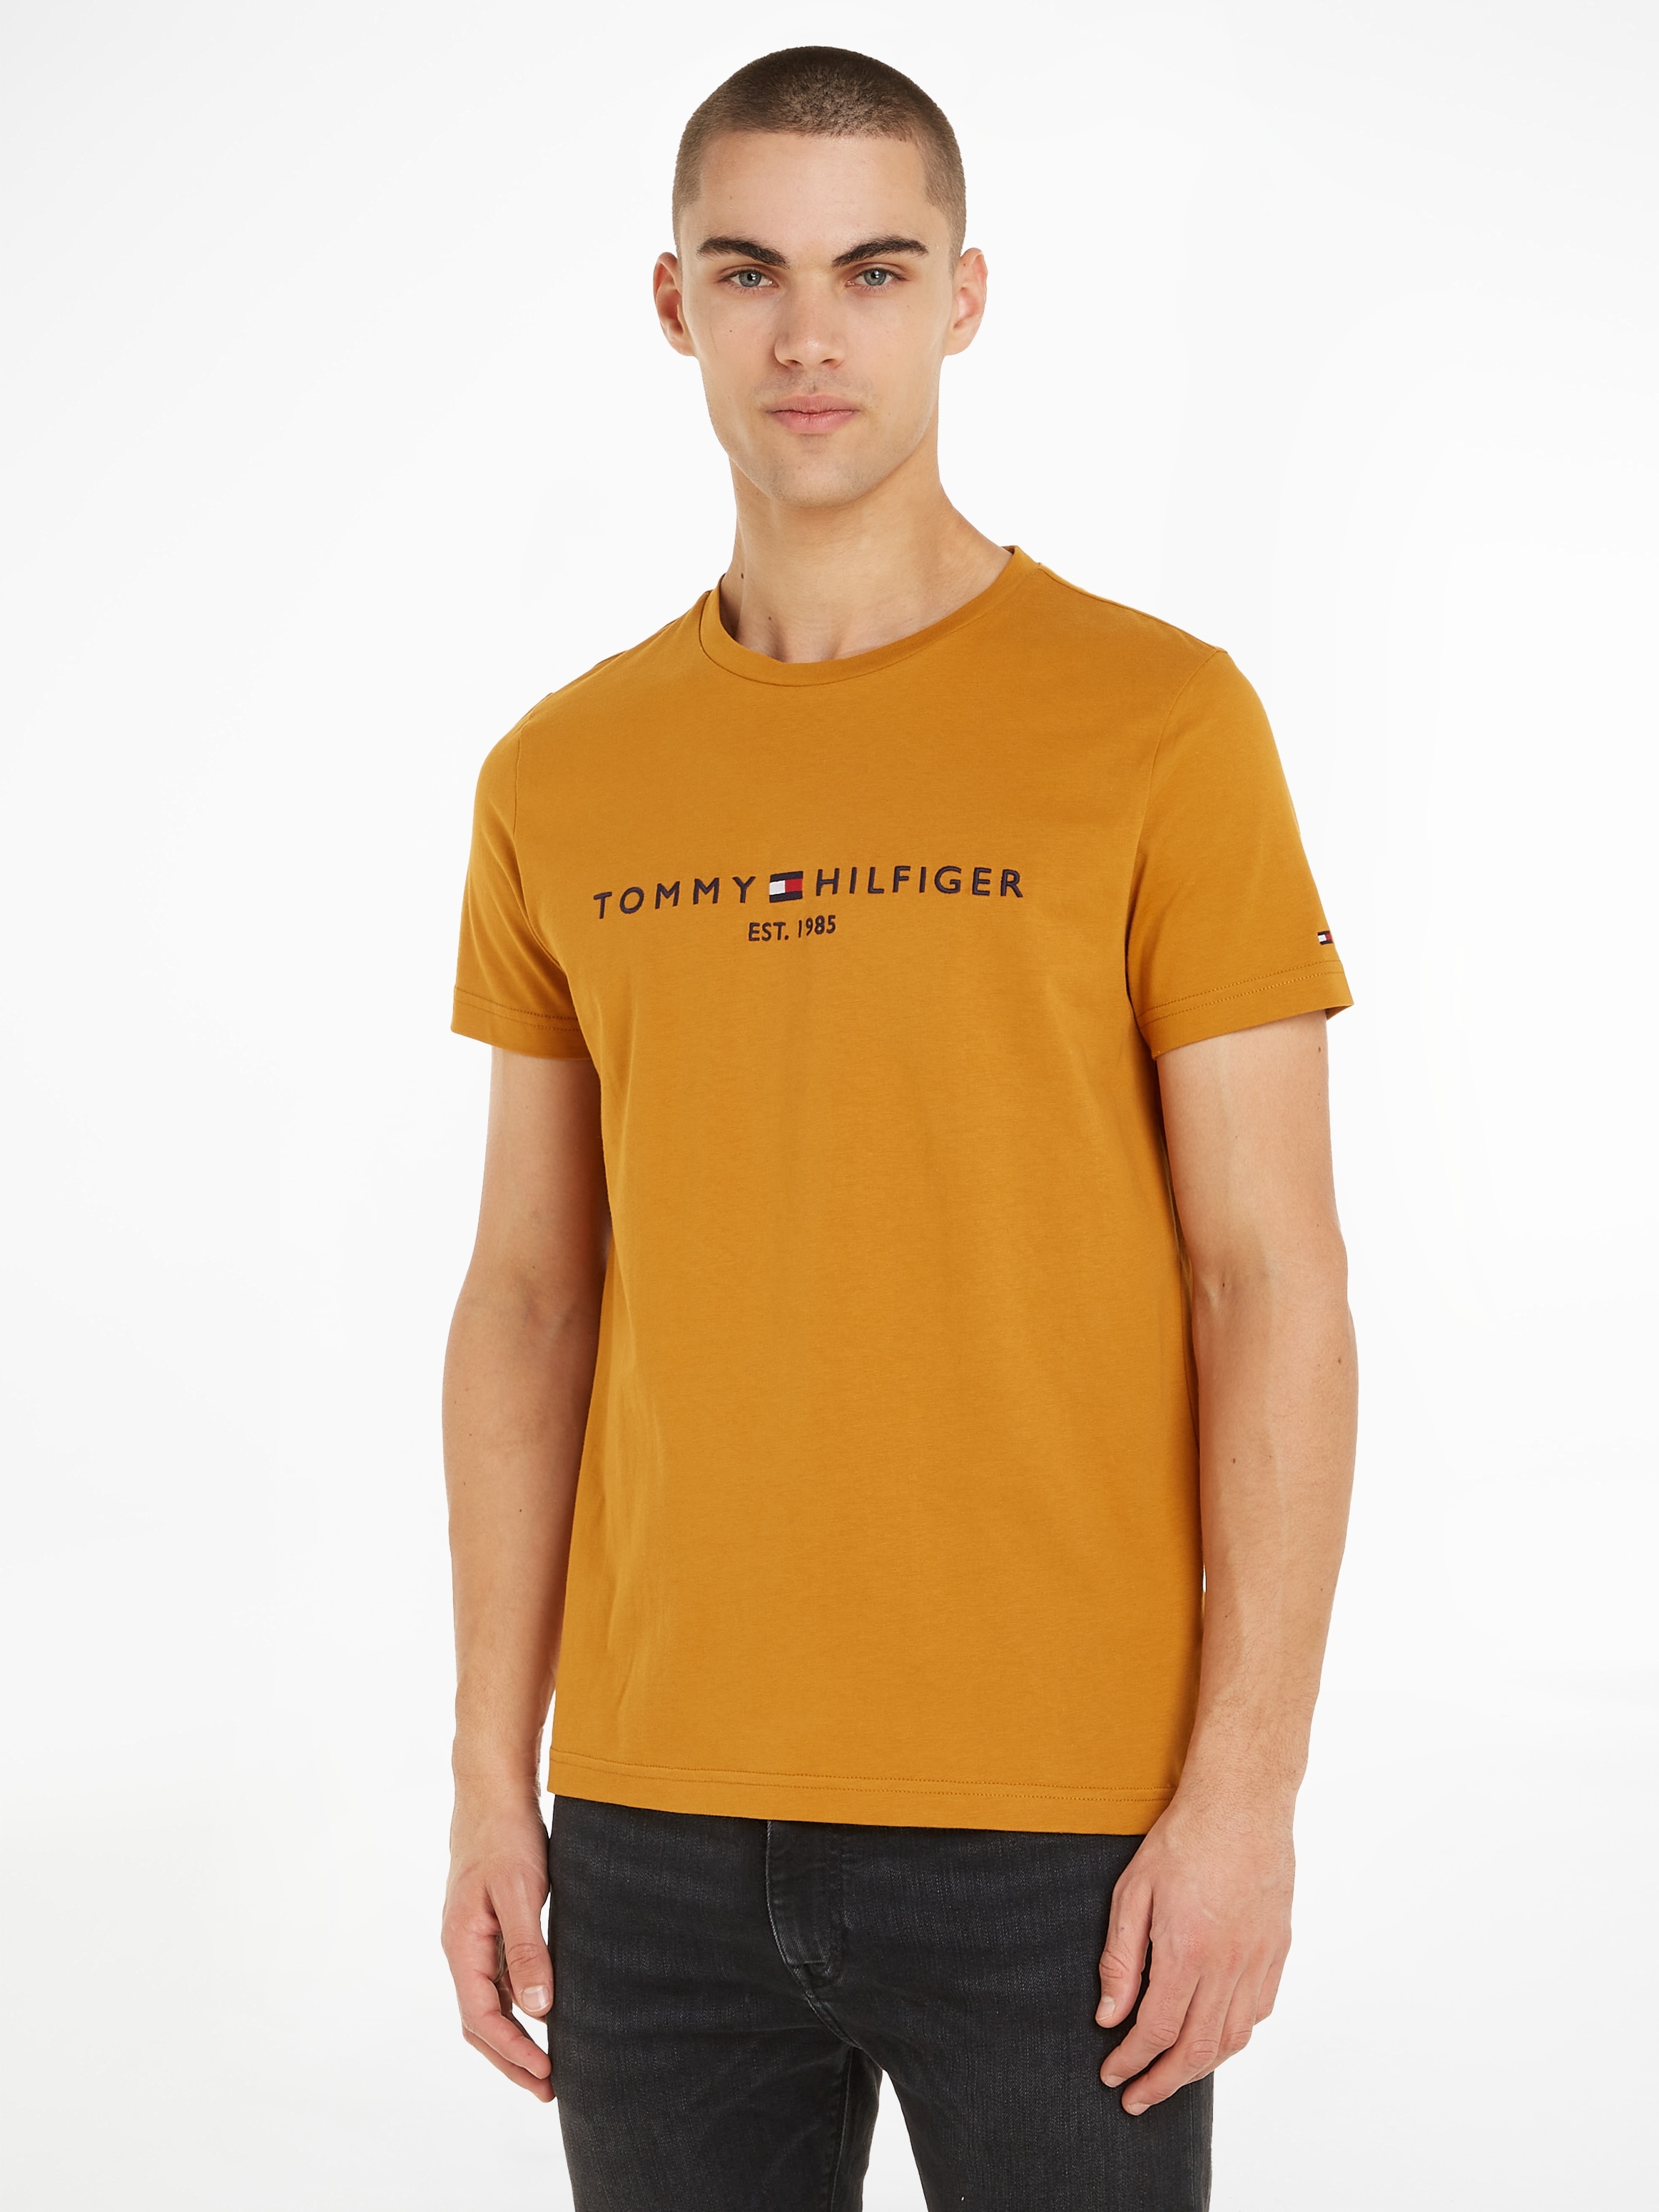 ♕ TEE« LOGO Hilfiger »TOMMY T-Shirt bei Tommy